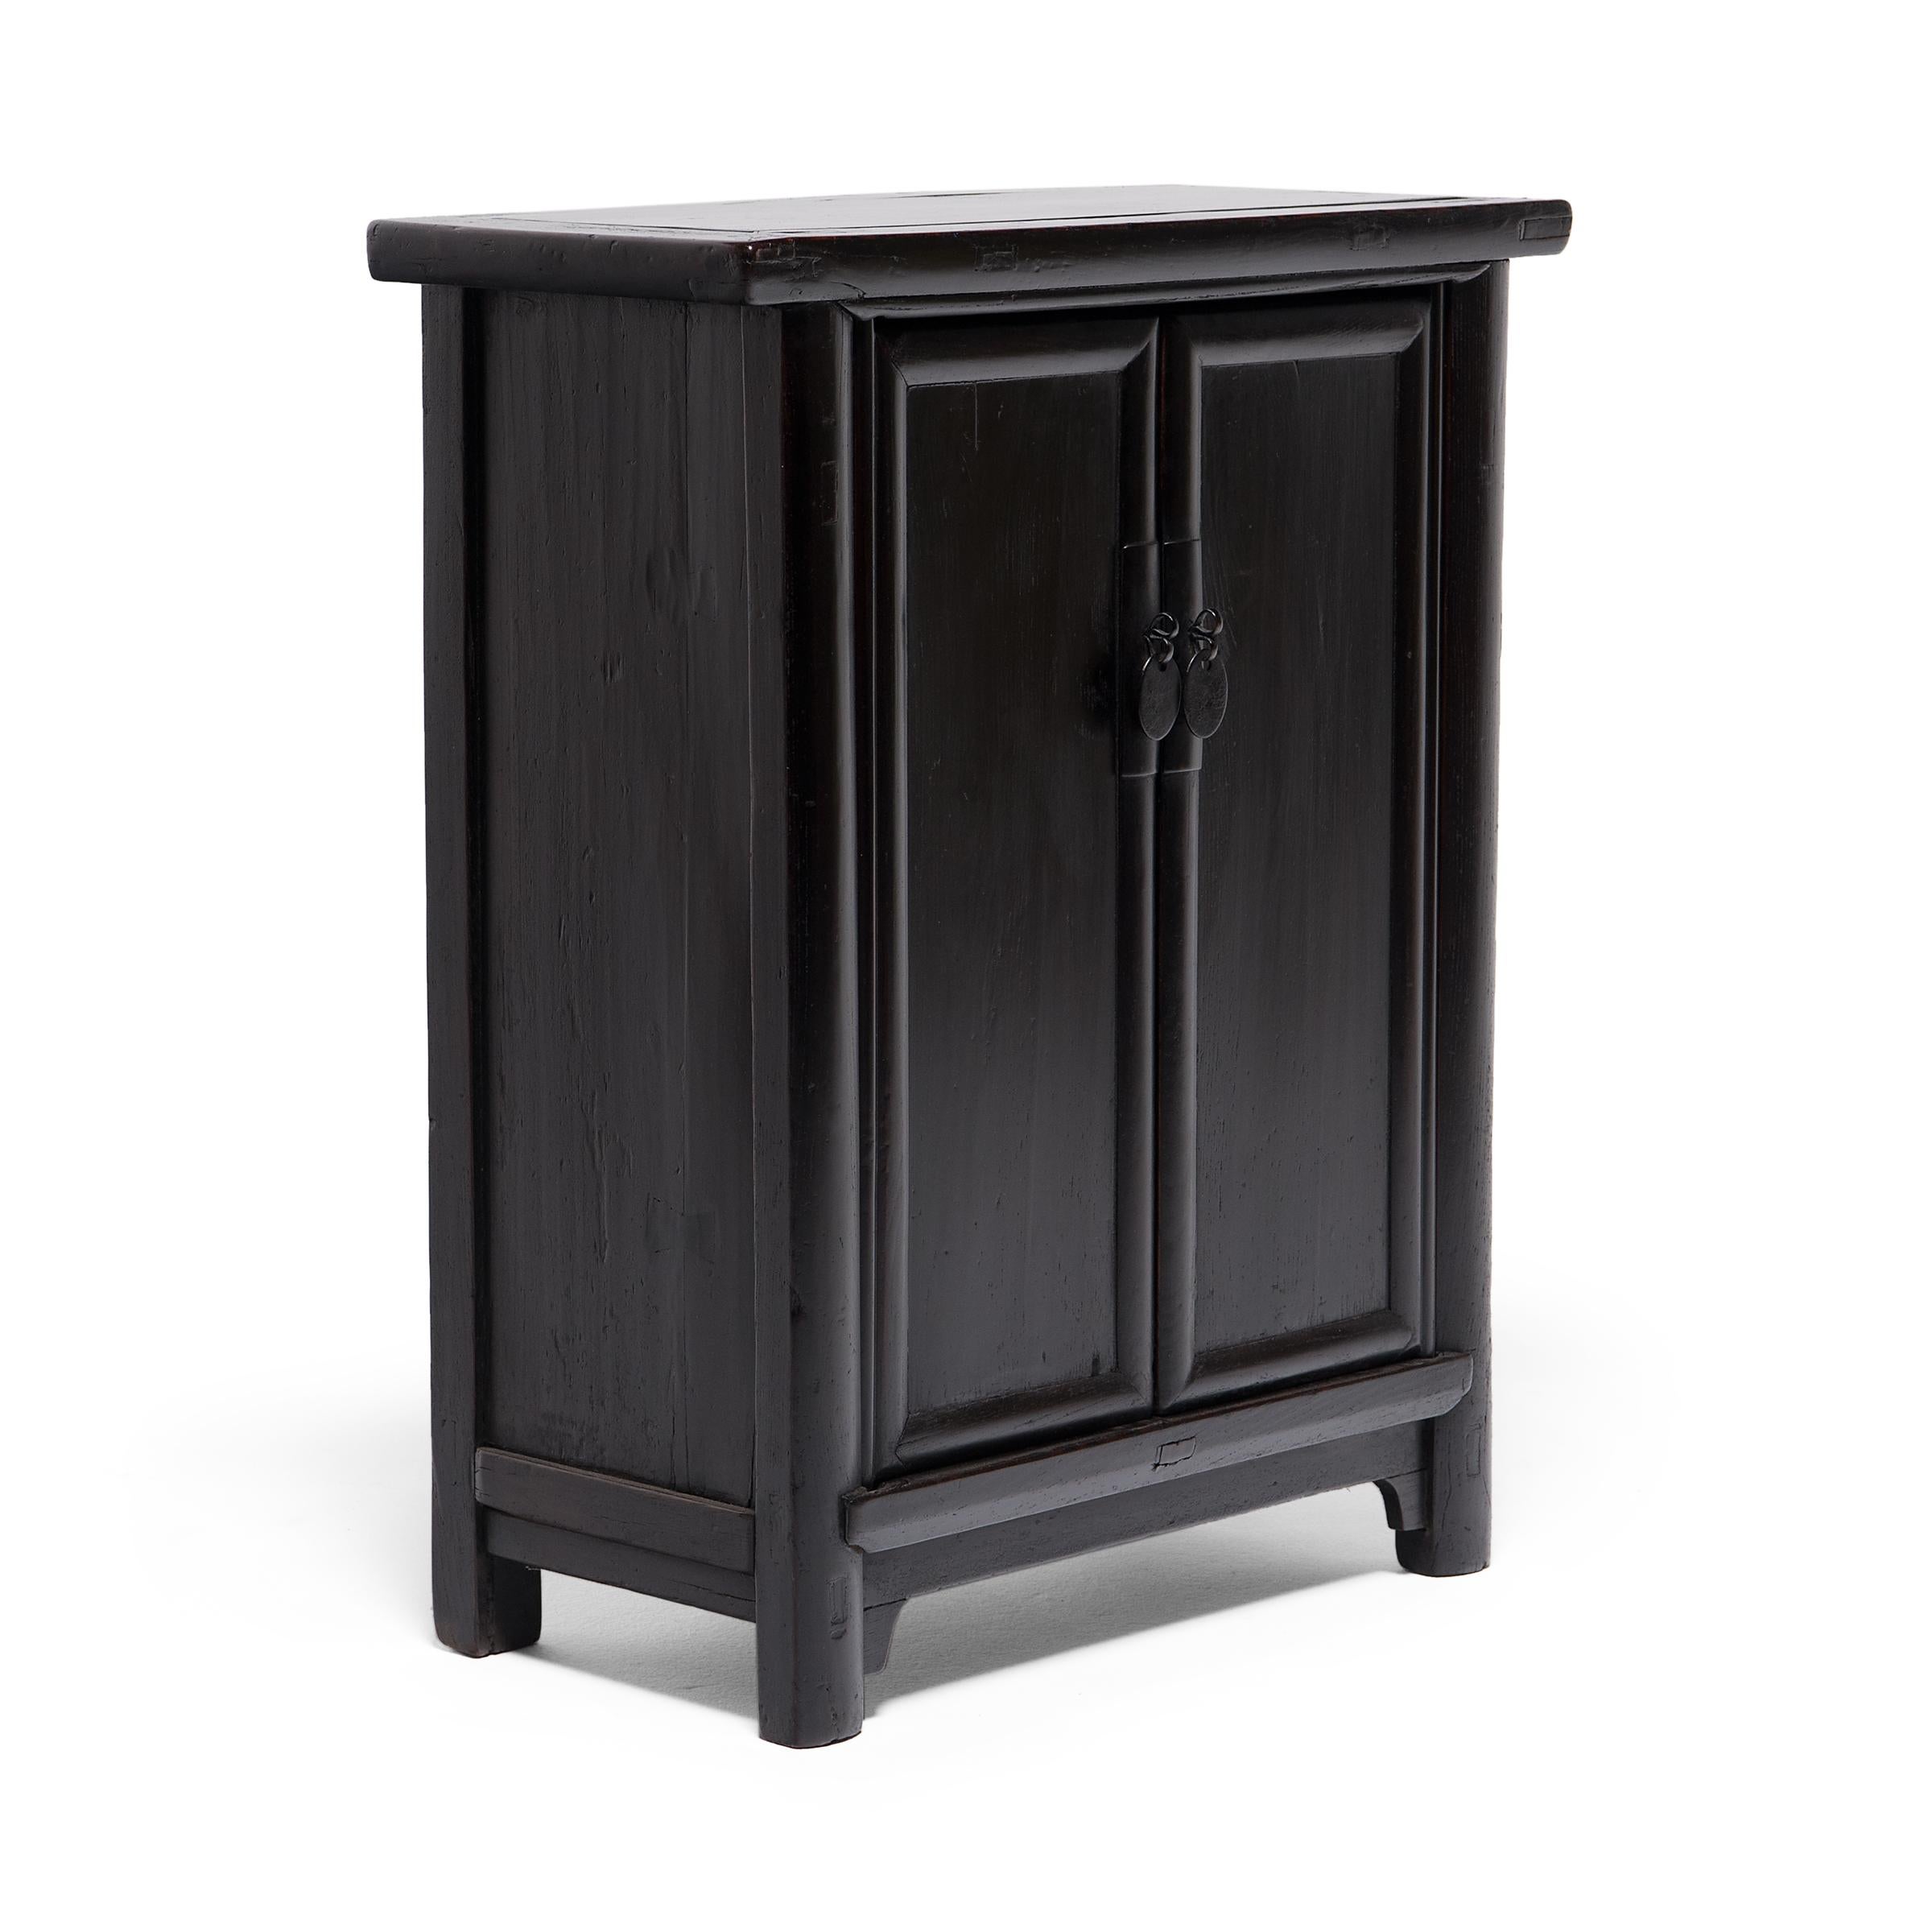 The quiet elegance of this small cabinet is thanks to its clean lines and balanced proportions. Dated to the late 19th century, this cabinet is designed to resemble the classic upright noodle cabinet, with a slight overhang, rounded edges, and two